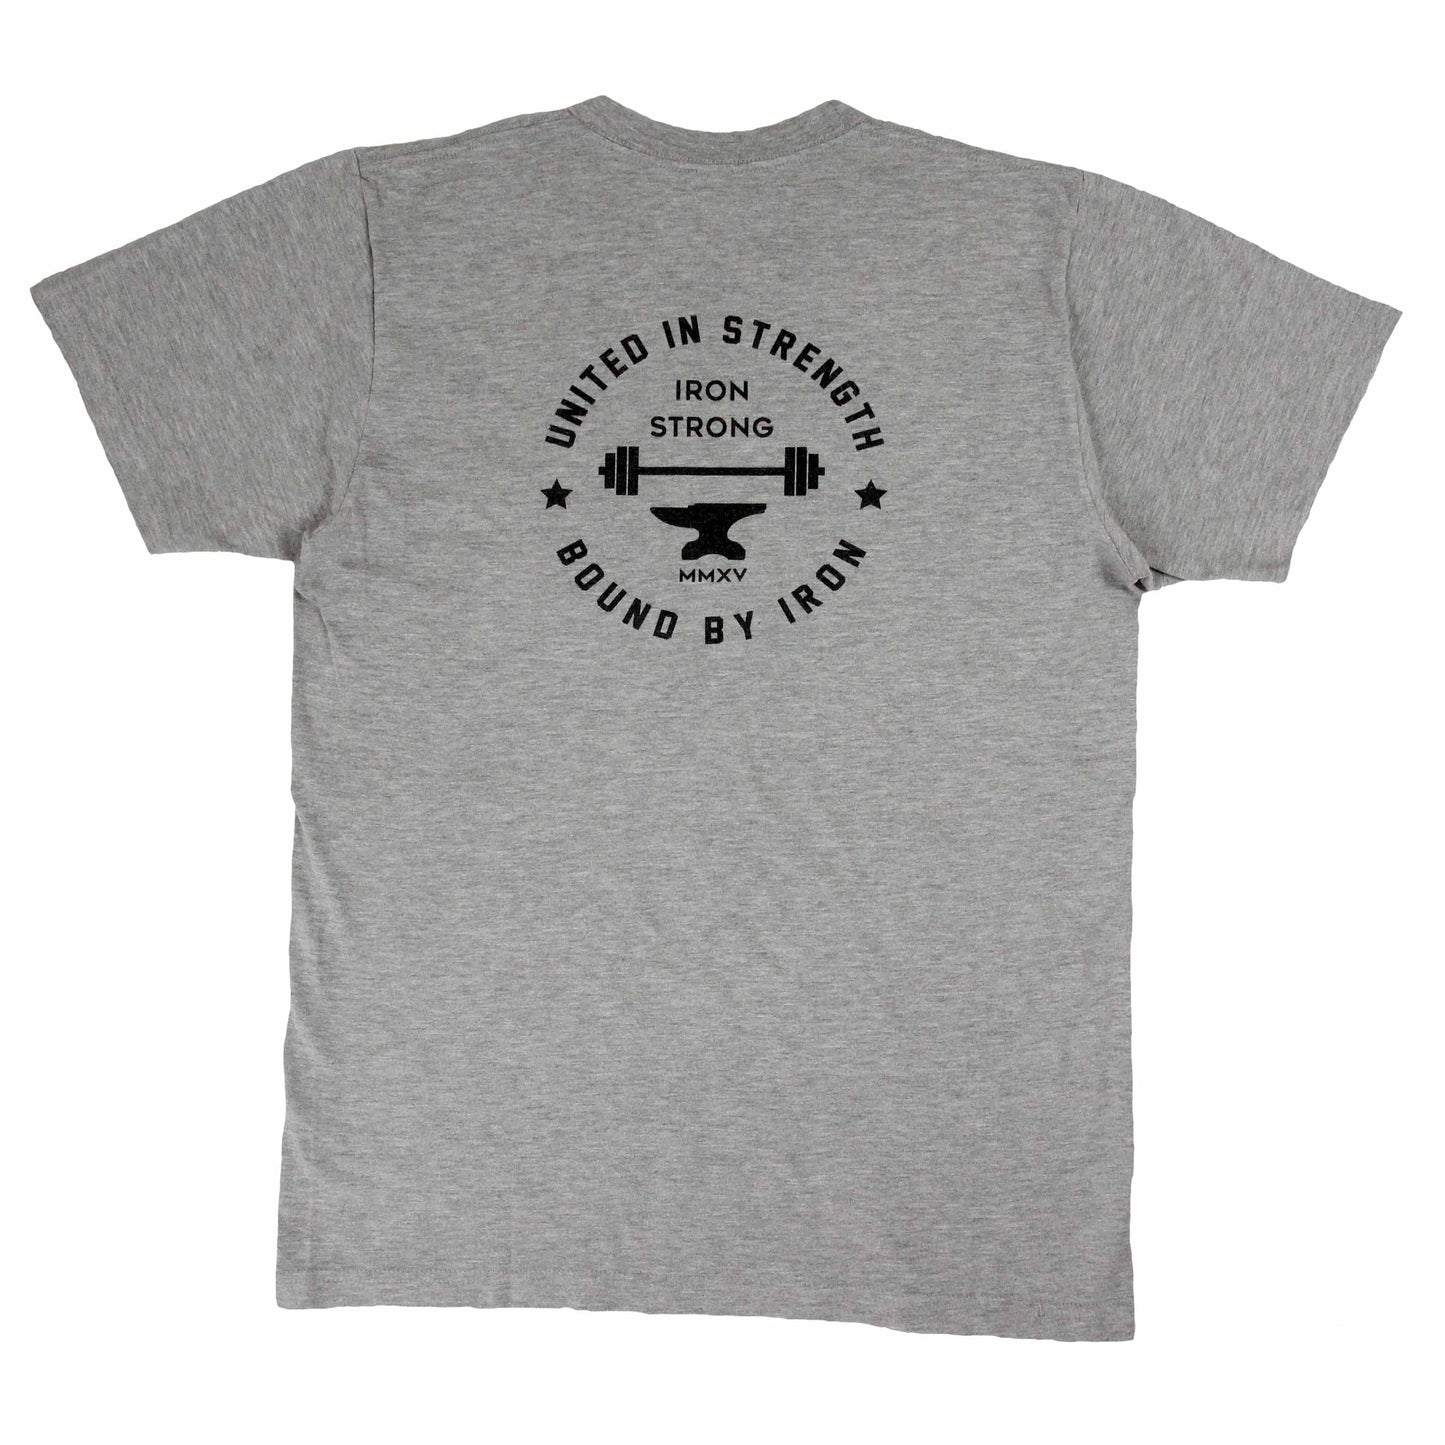 The 'Iron Crest' CrossFit shirt | Iron Strong Apparel